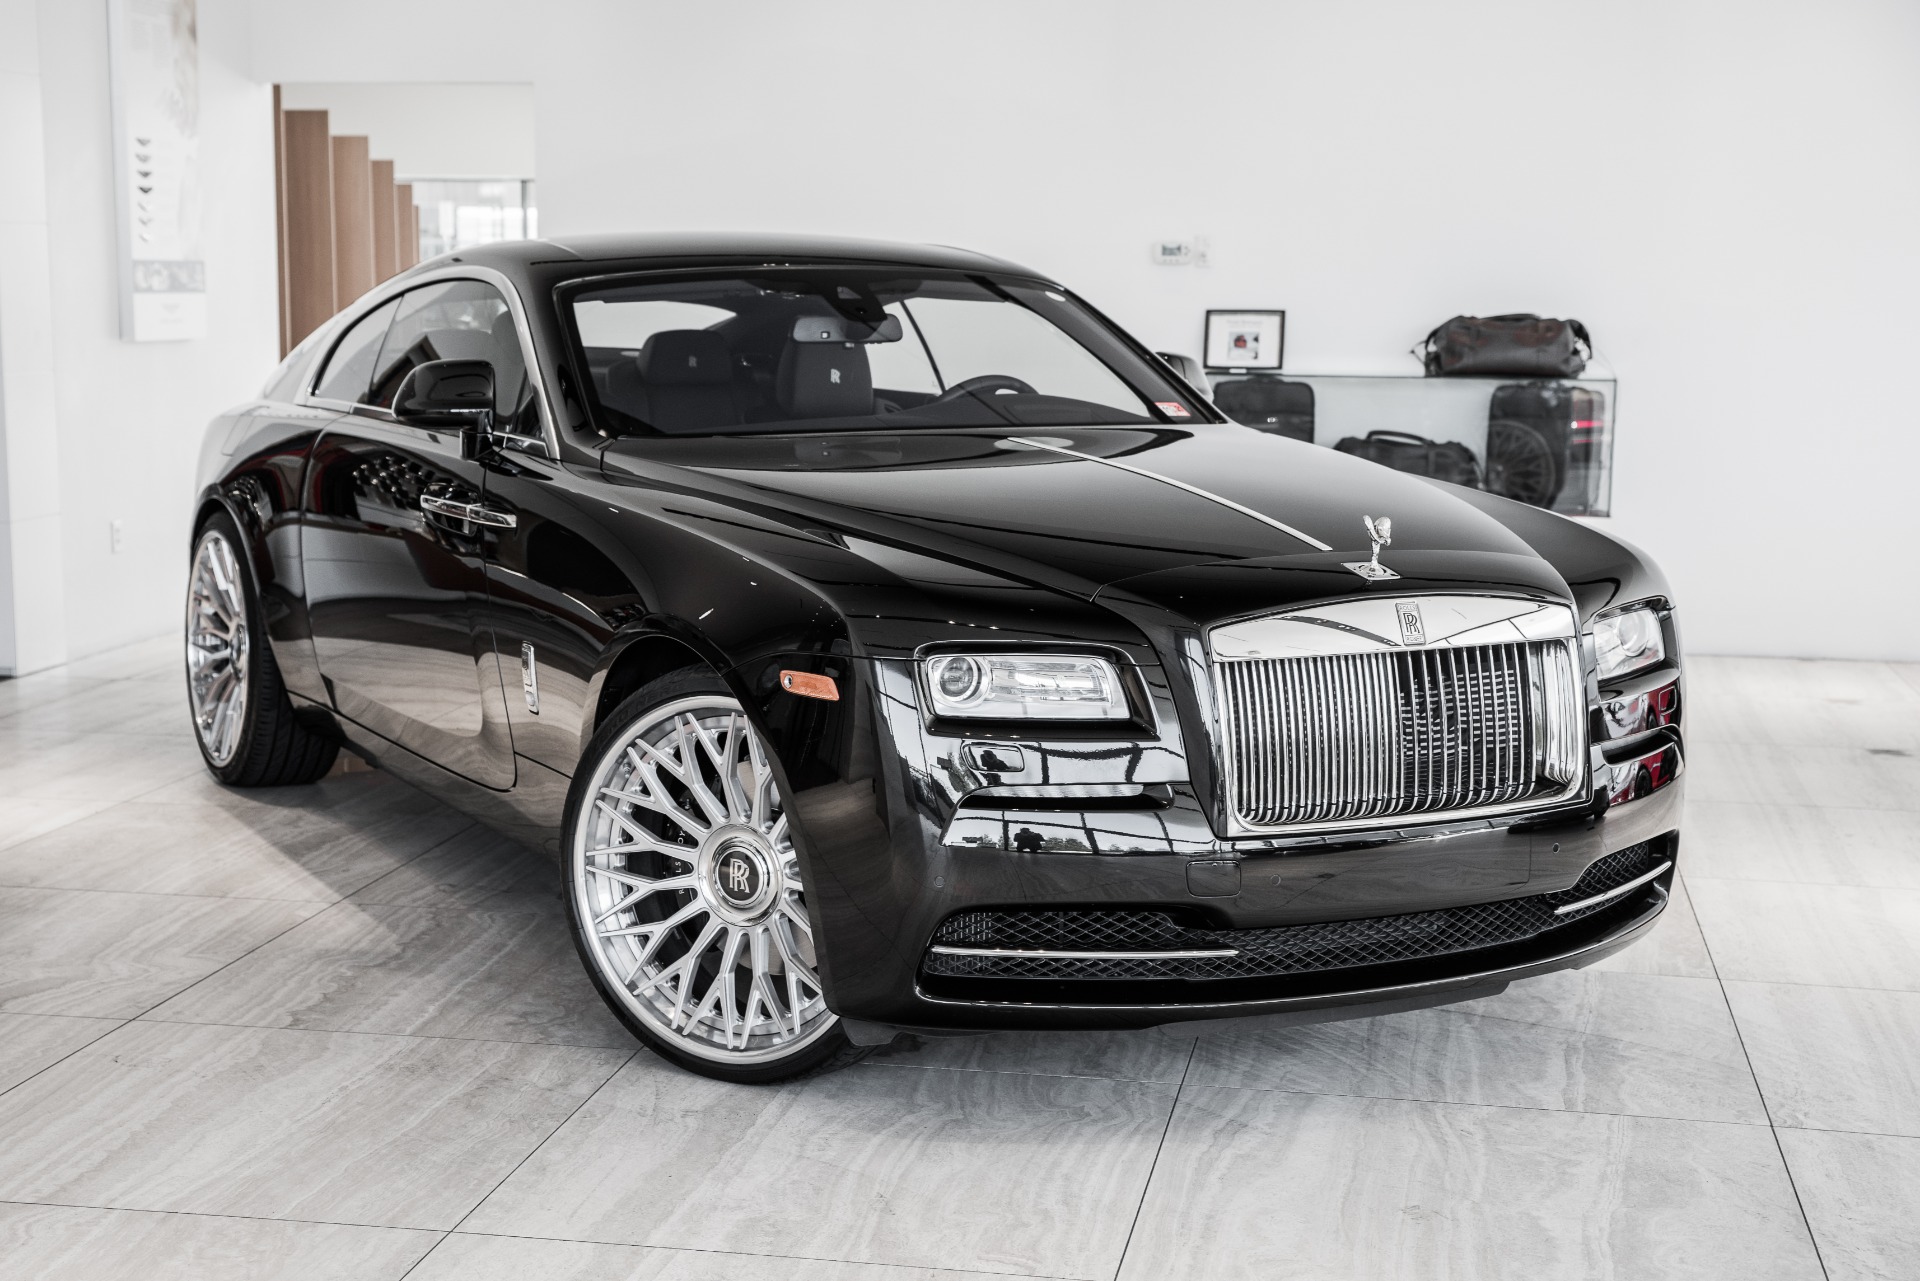 PreOwned 2015 RollsRoyce Wraith Coupe in Chicago GC3659B  Maserati of  Chicago